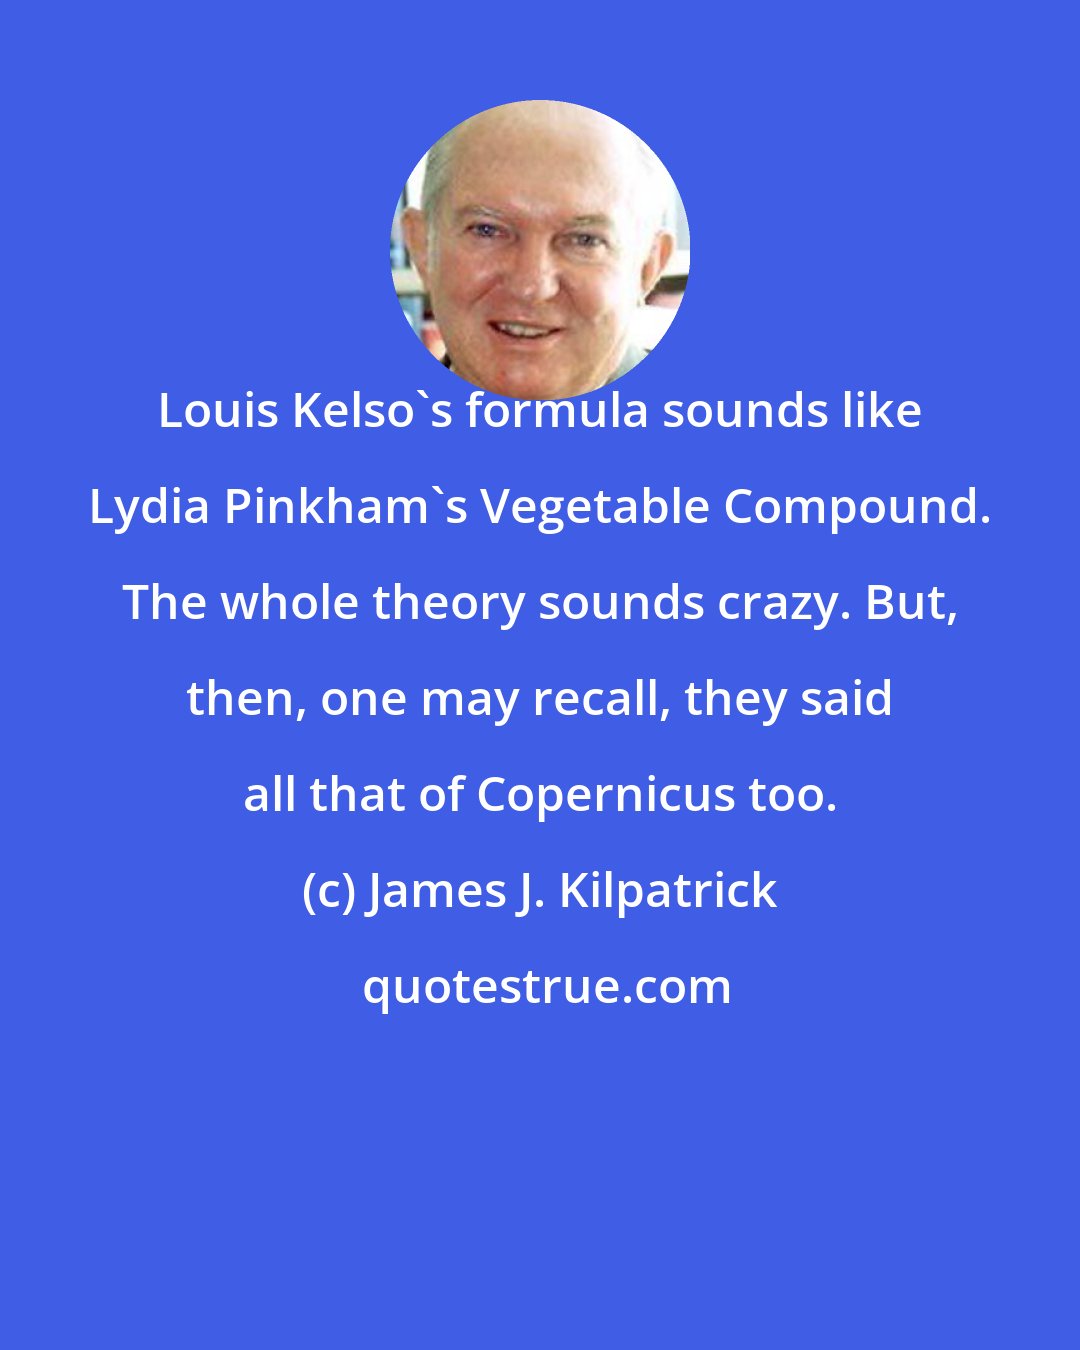 James J. Kilpatrick: Louis Kelso's formula sounds like Lydia Pinkham's Vegetable Compound. The whole theory sounds crazy. But, then, one may recall, they said all that of Copernicus too.